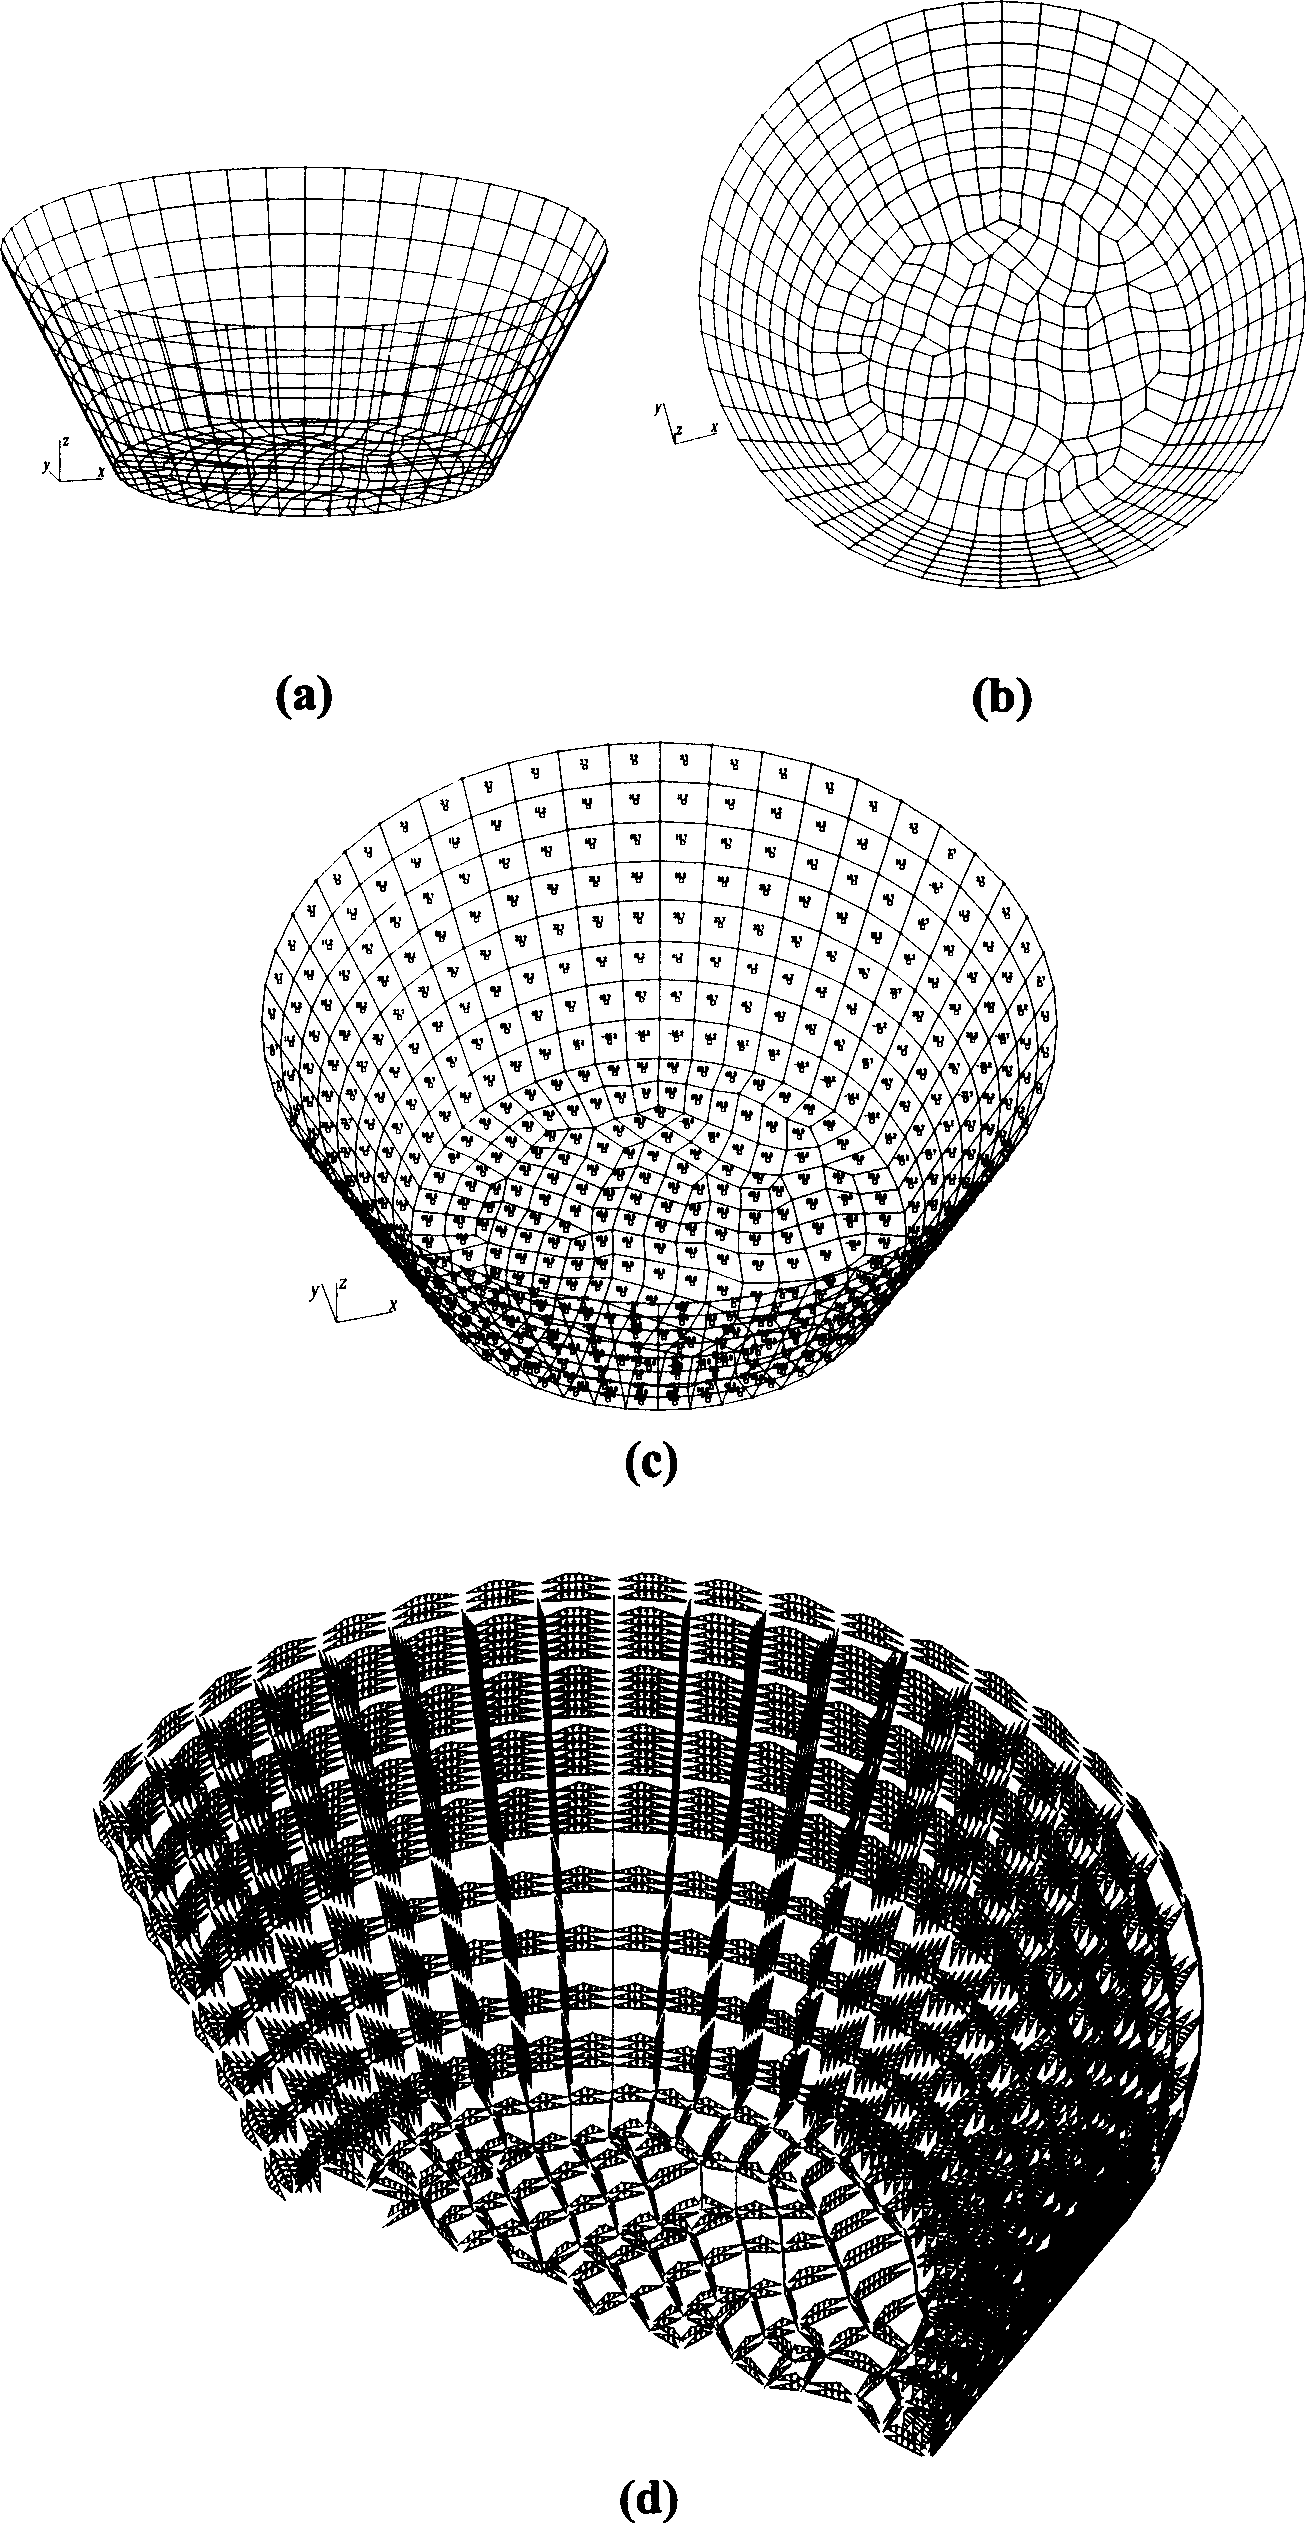 Lattice loading method for treating random distributed load on curved surface